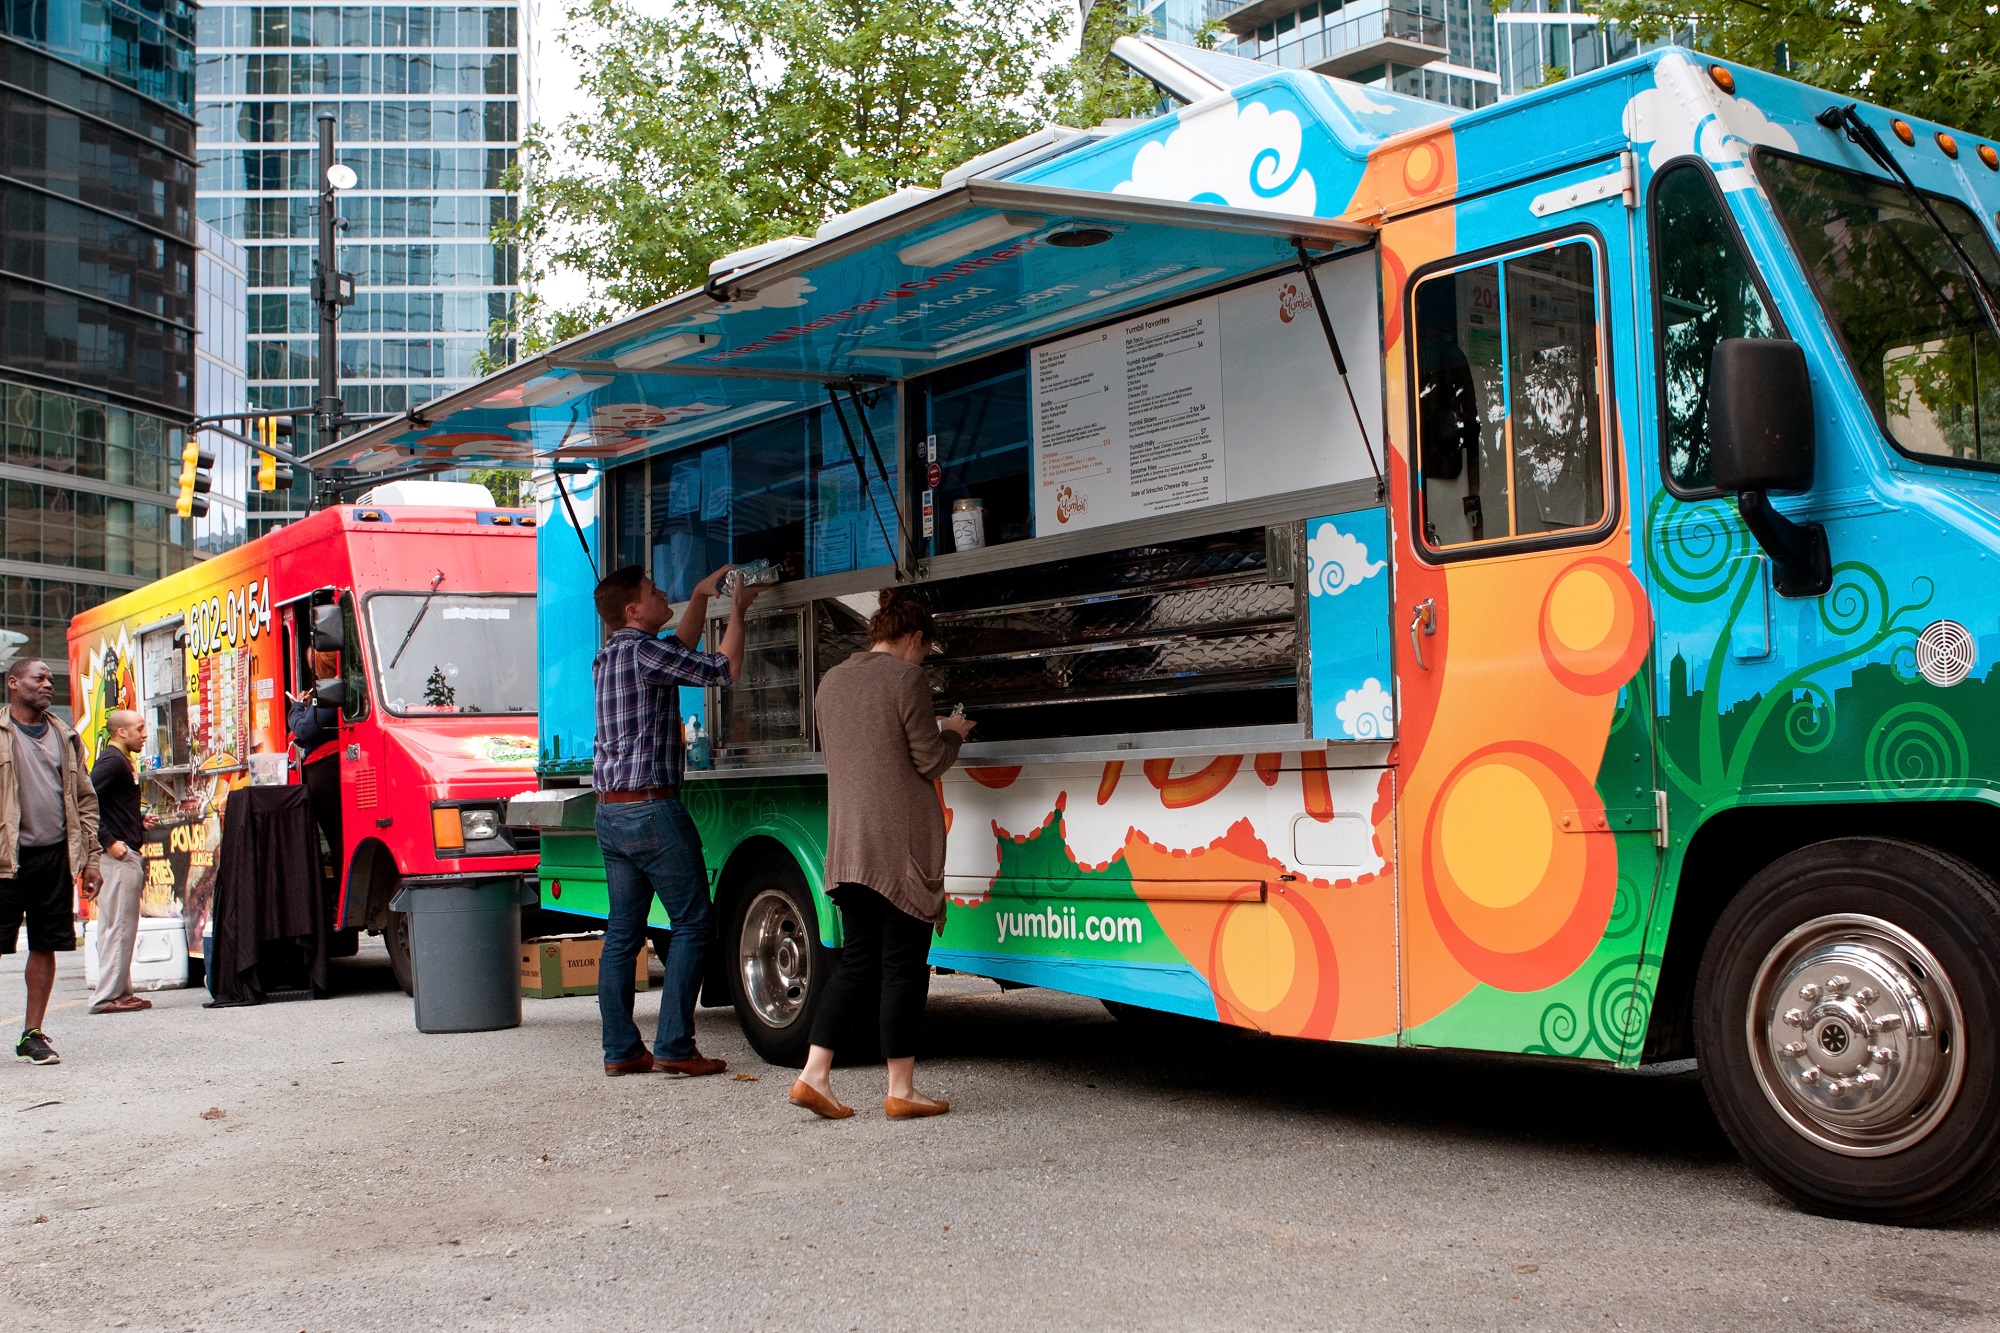 8 Secrets Behind the Most Successful Food Truck Businesses